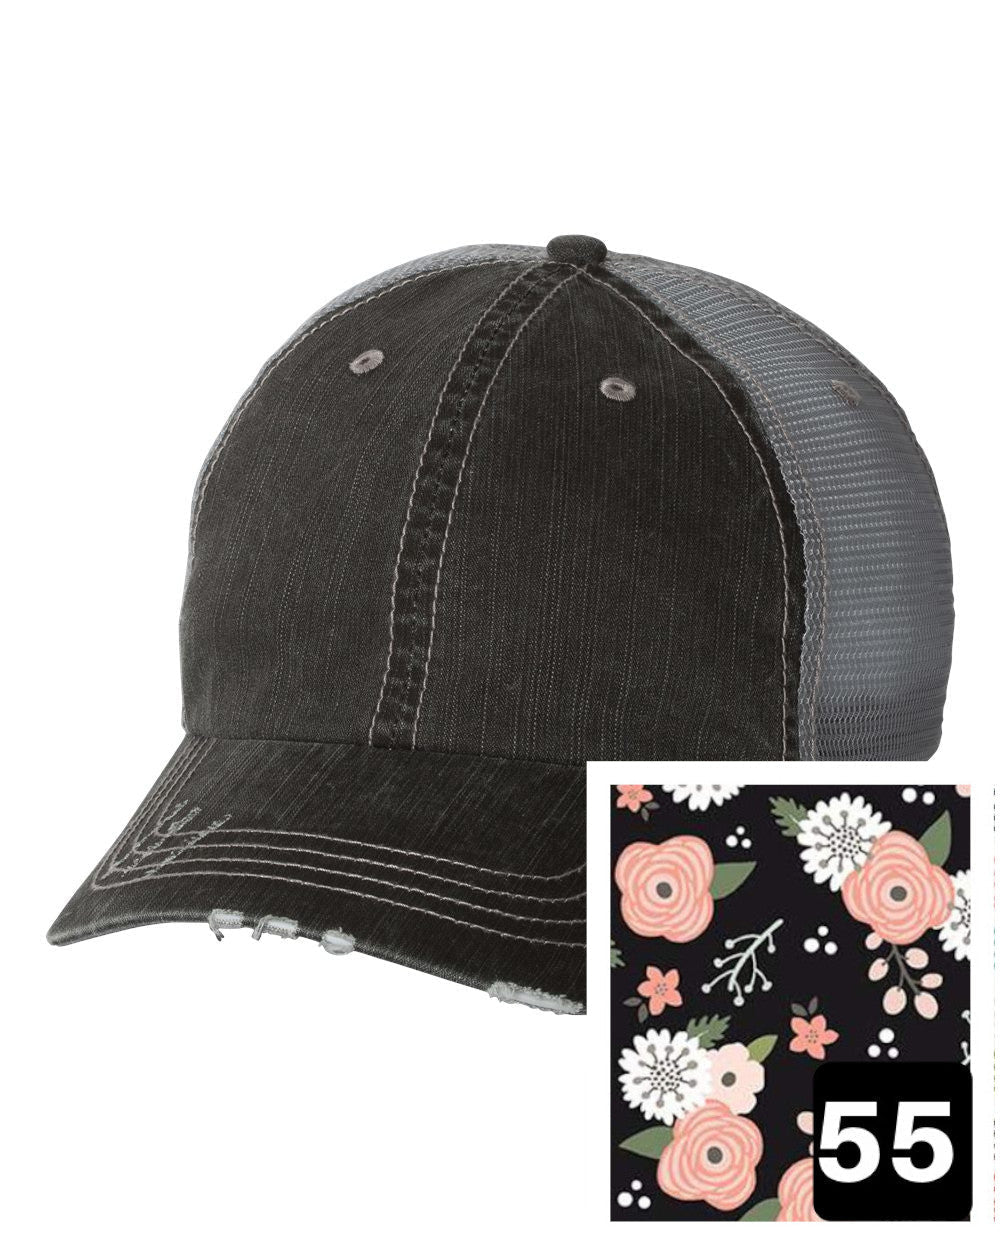 gray distressed trucker hat with petite floral on navy fabric state of South Dakota